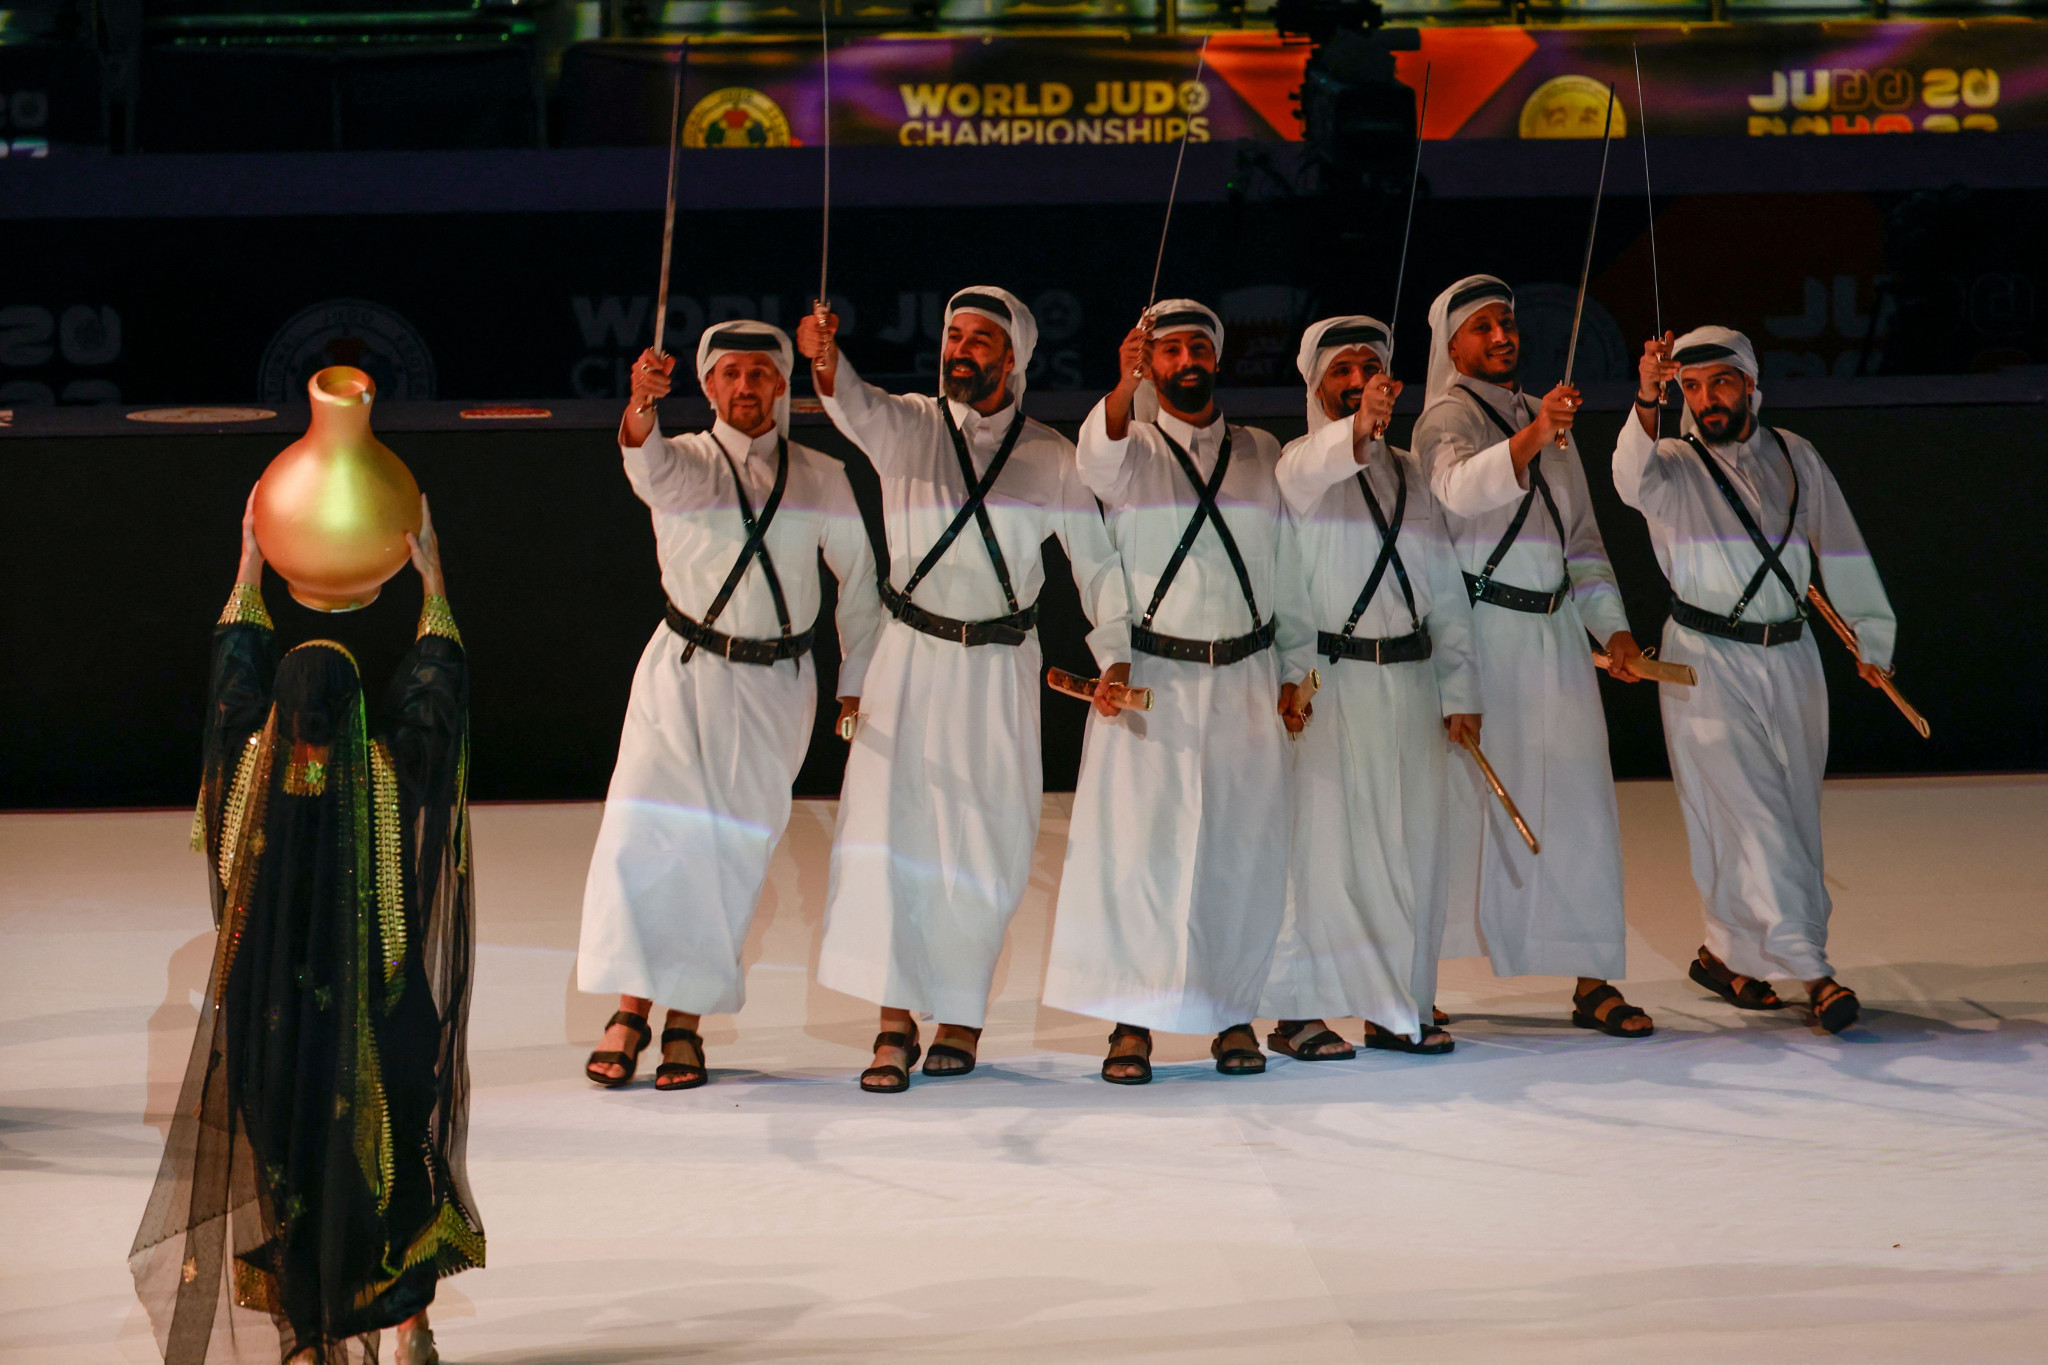 Performers celebrate Qatari culture with traditional dances during the Opening Ceremony ©Getty Images